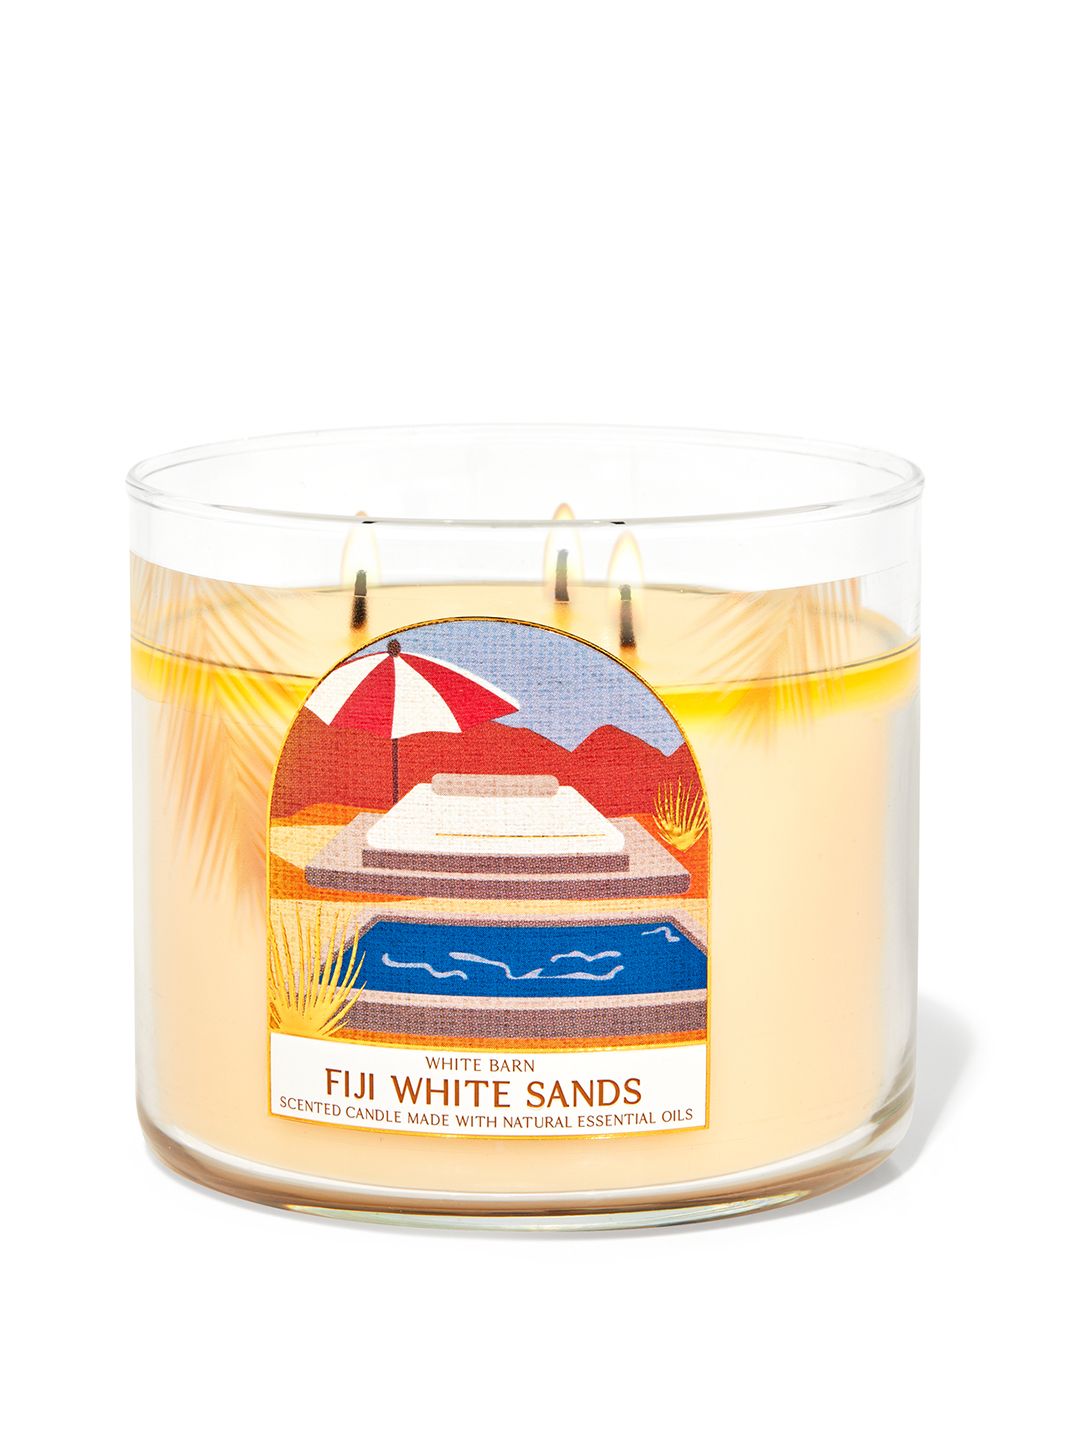 Bath & Body Works Fiji White Sands 3-Wick Scented Candle with Essential Oils - 411g Price in India